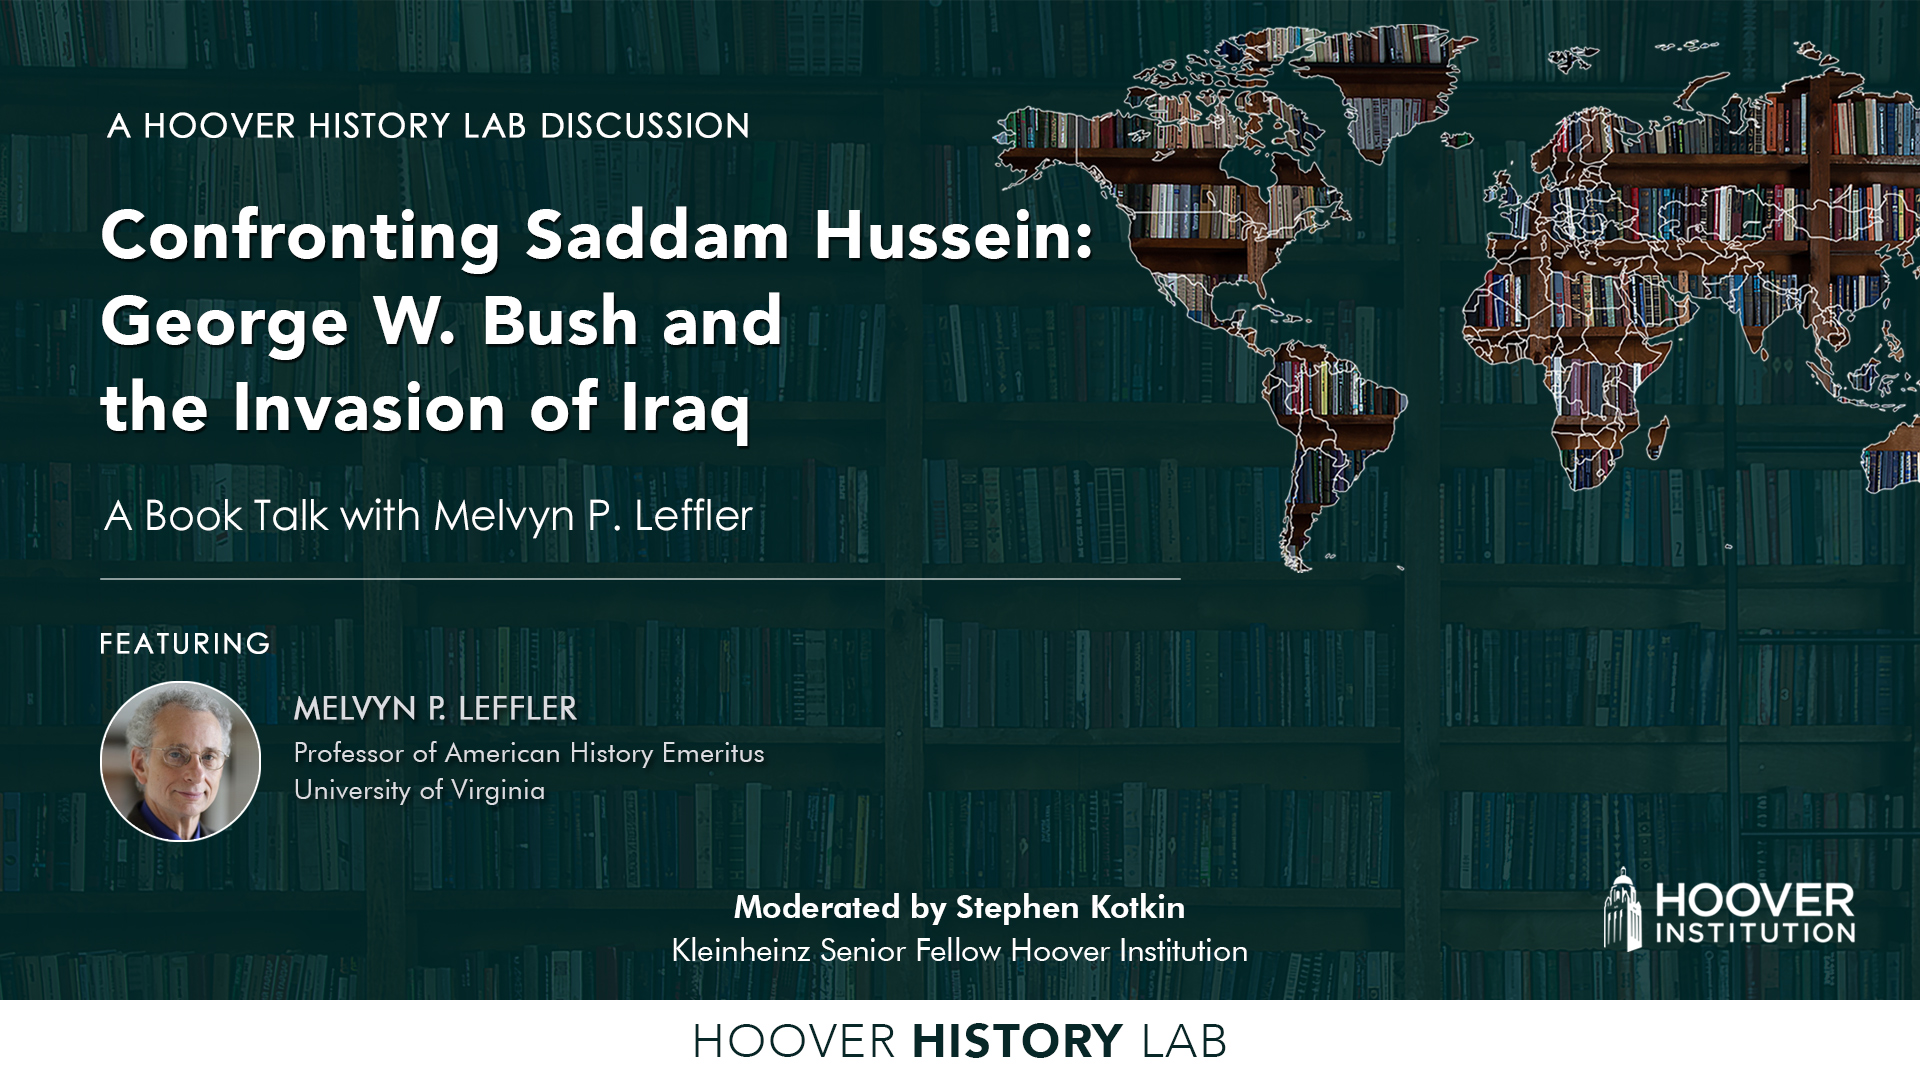 Book Talk with Melvyn P. Leffler  Confronting Saddam Hussein: George W. Bush and the Invasion of Iraq